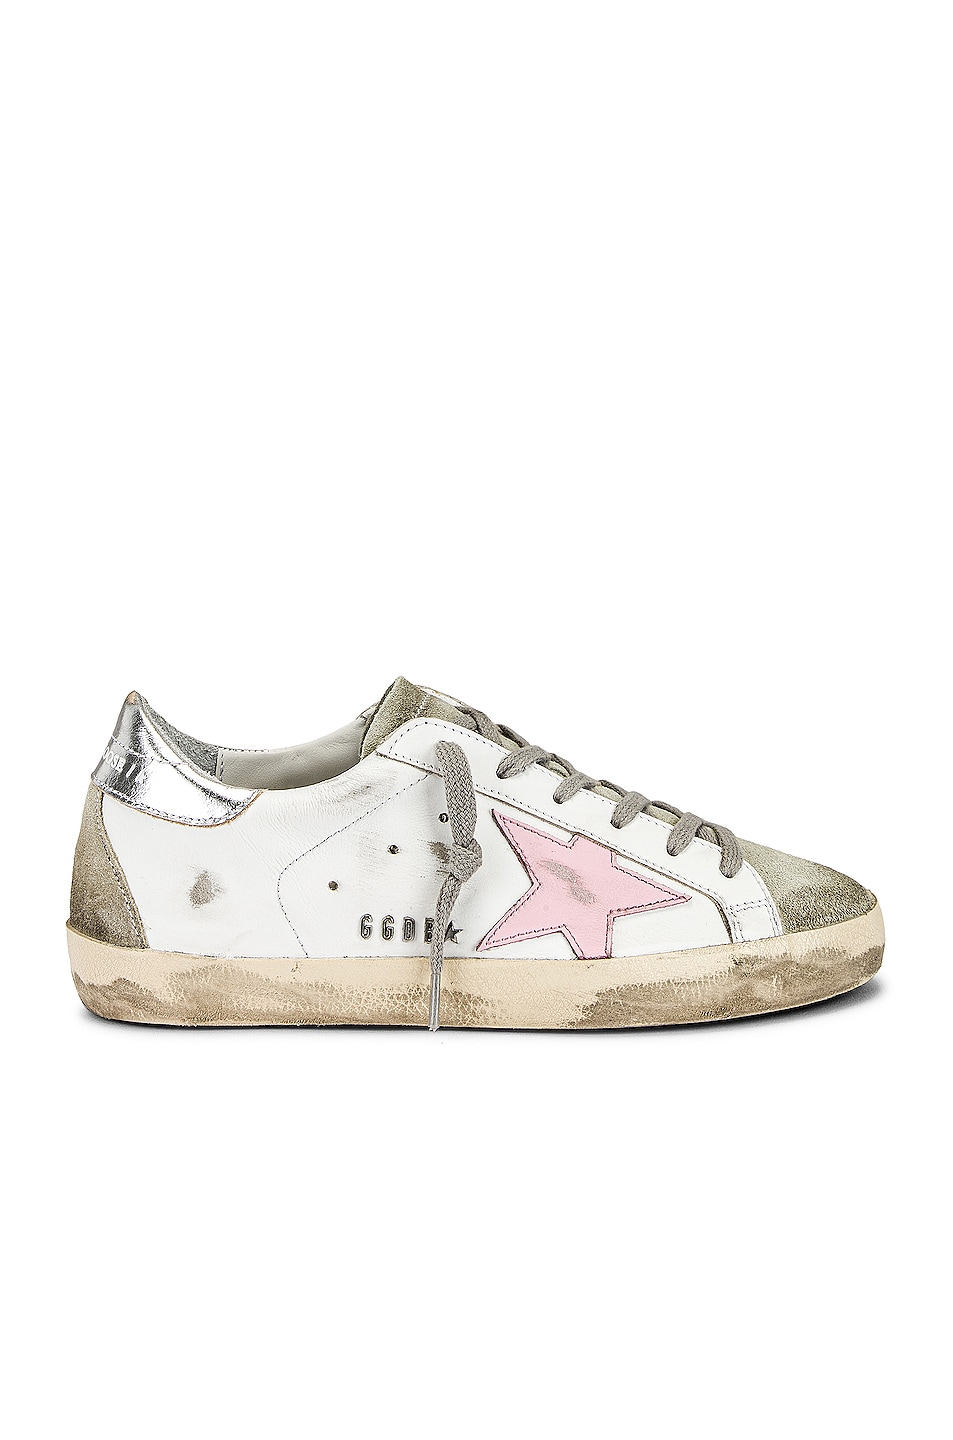 Golden Goose Superstar Sneaker in White, Ice, Orchid Pink, & Silver | FWRD